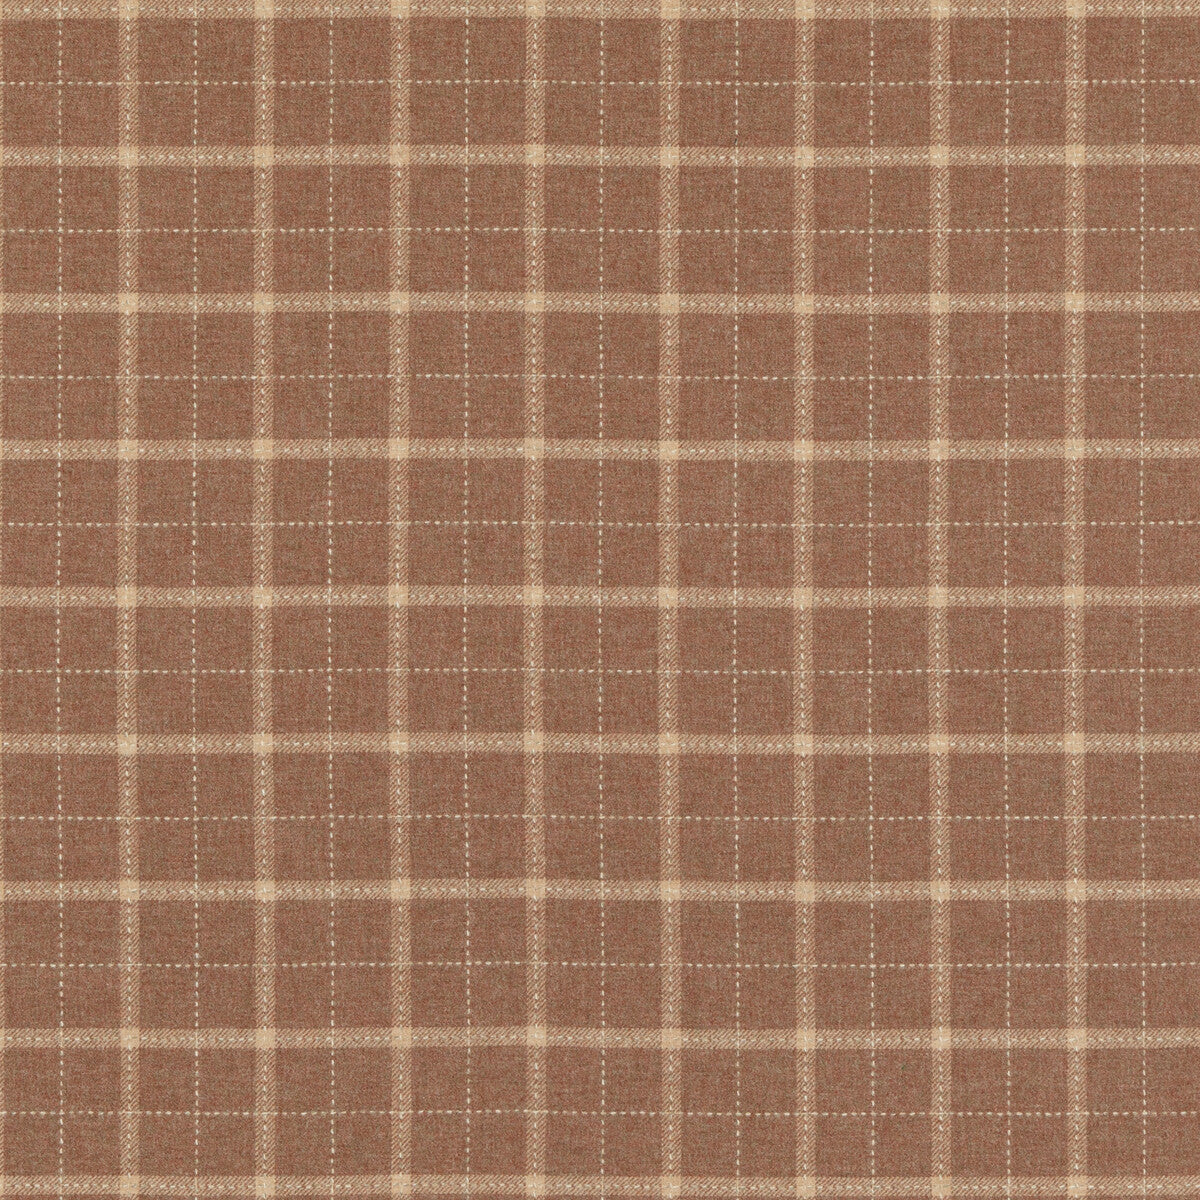 Bowmont fabric in russet color - pattern FD806.V55.0 - by Mulberry in the Mulberry Wools IV collection